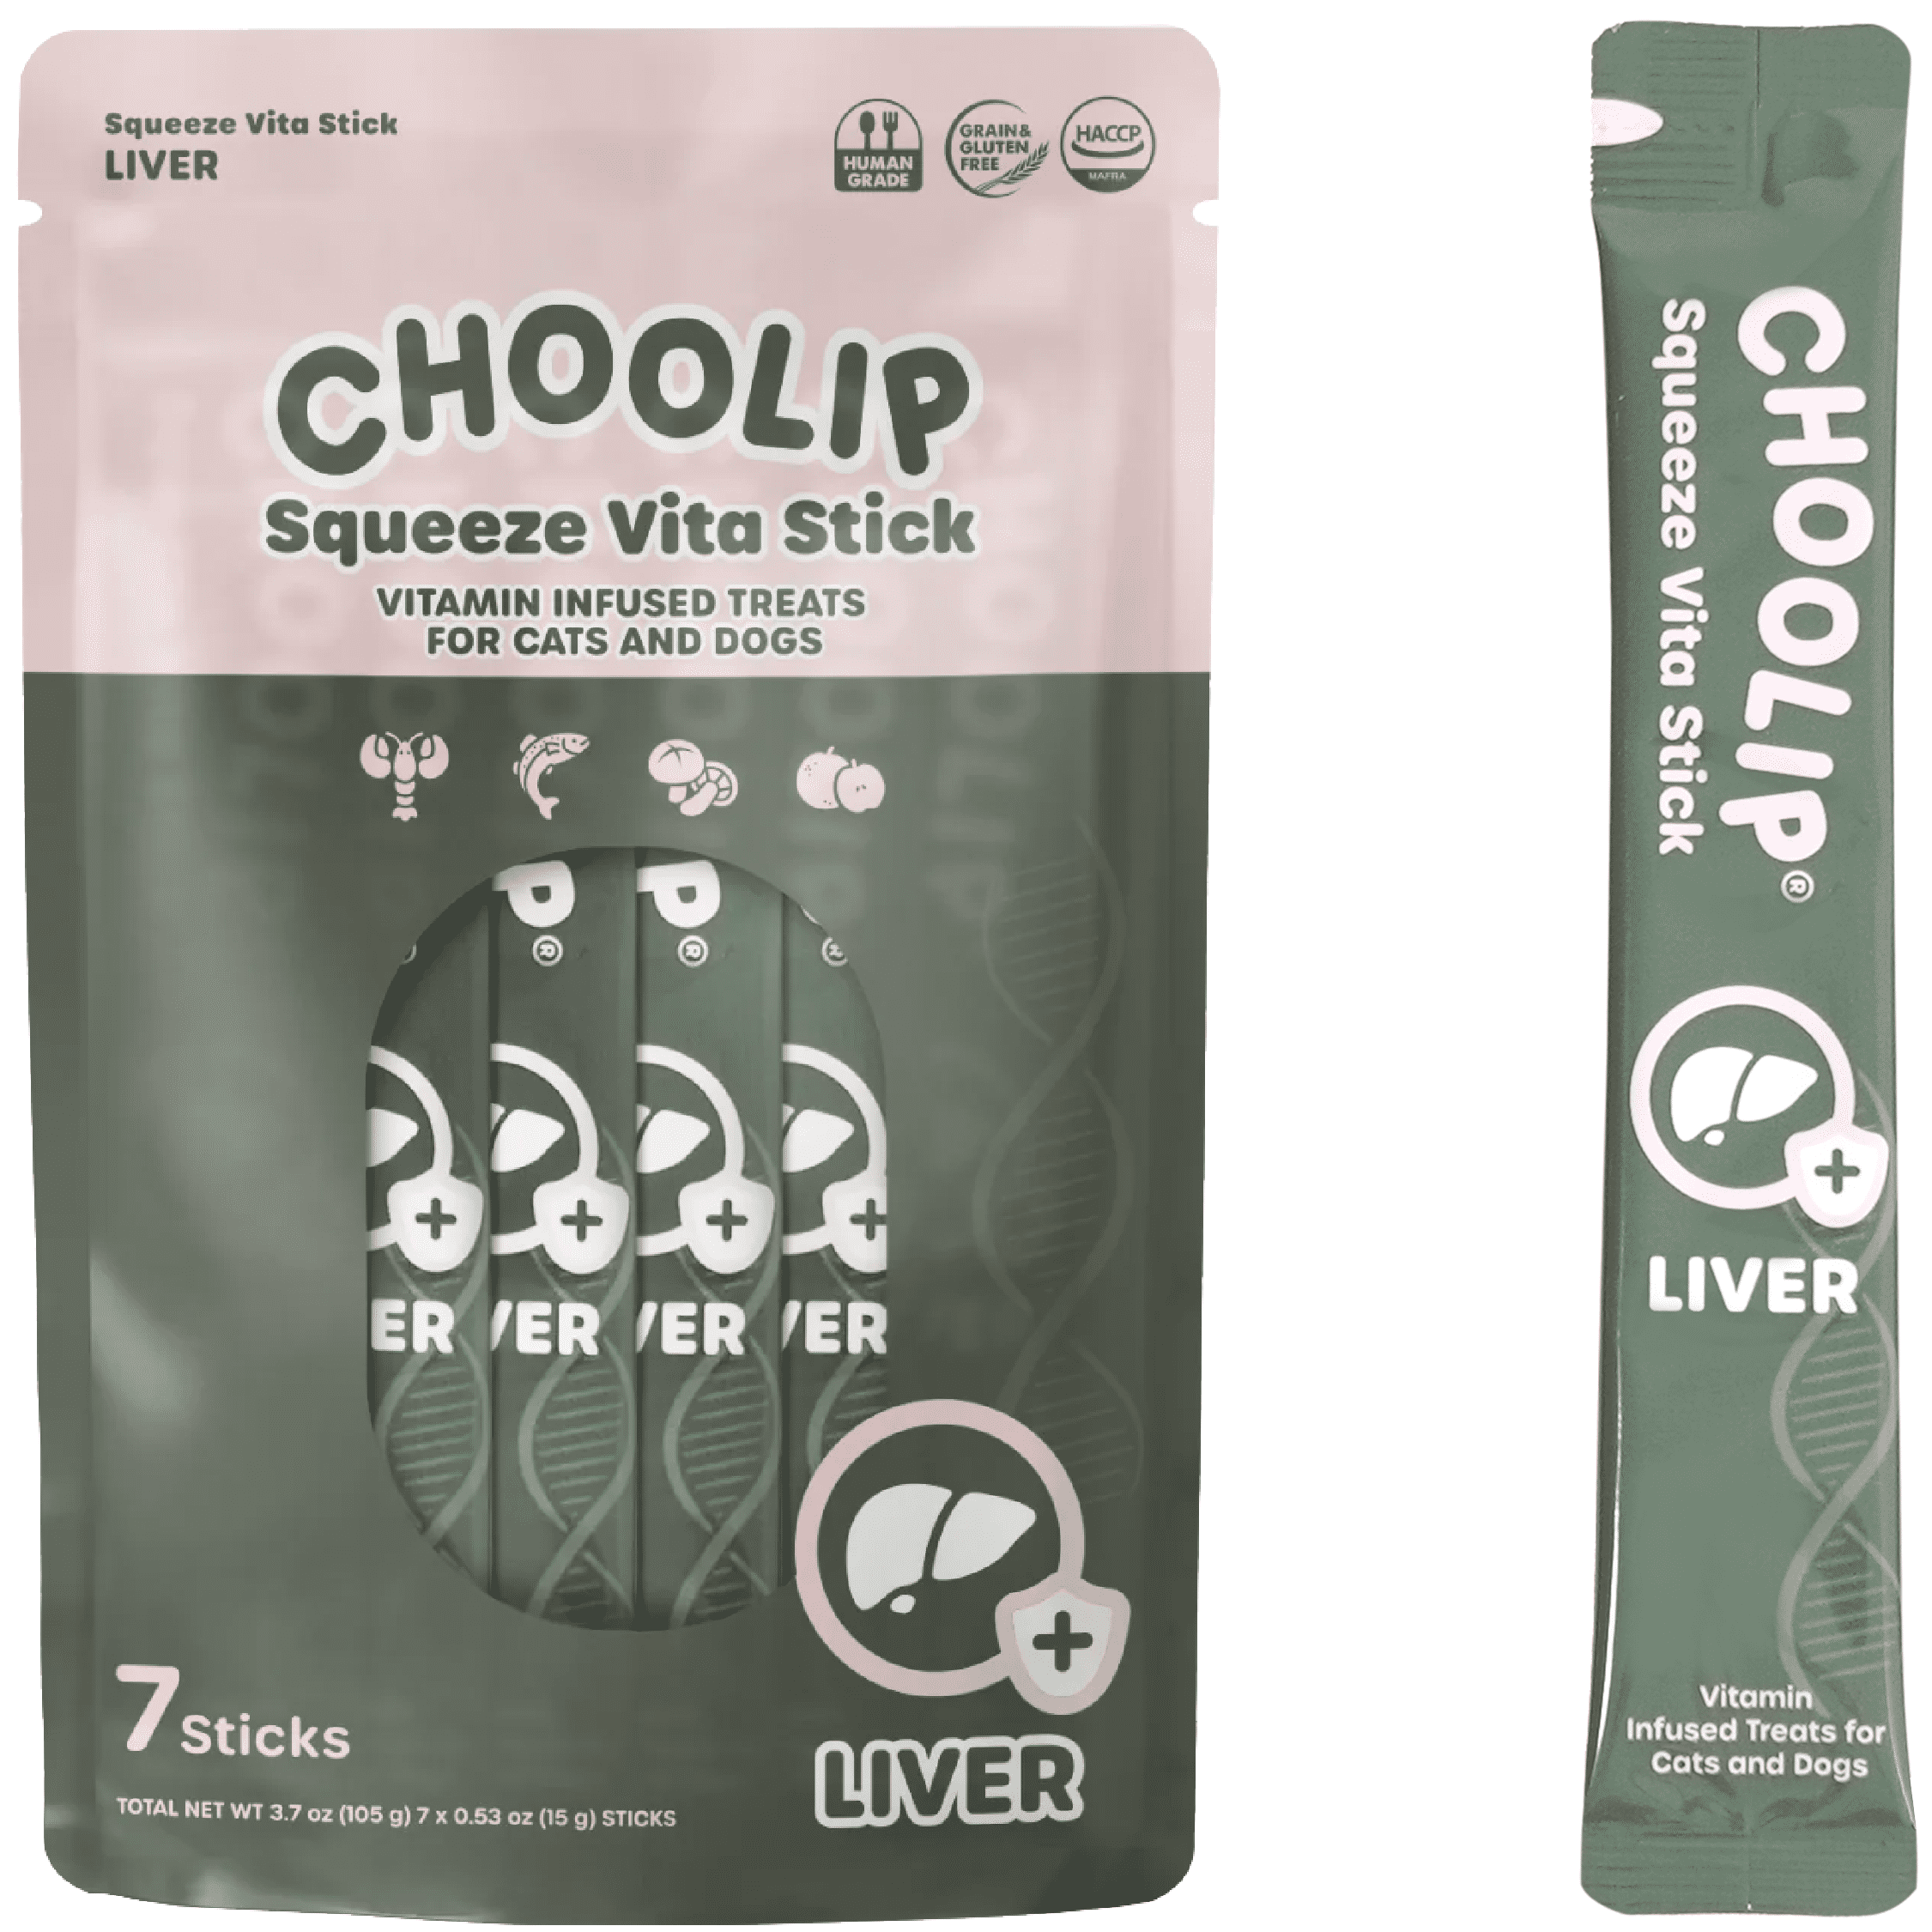 Choolip Squeeze Vita Stick for Liver. Natural Cat Treats with Milk ...